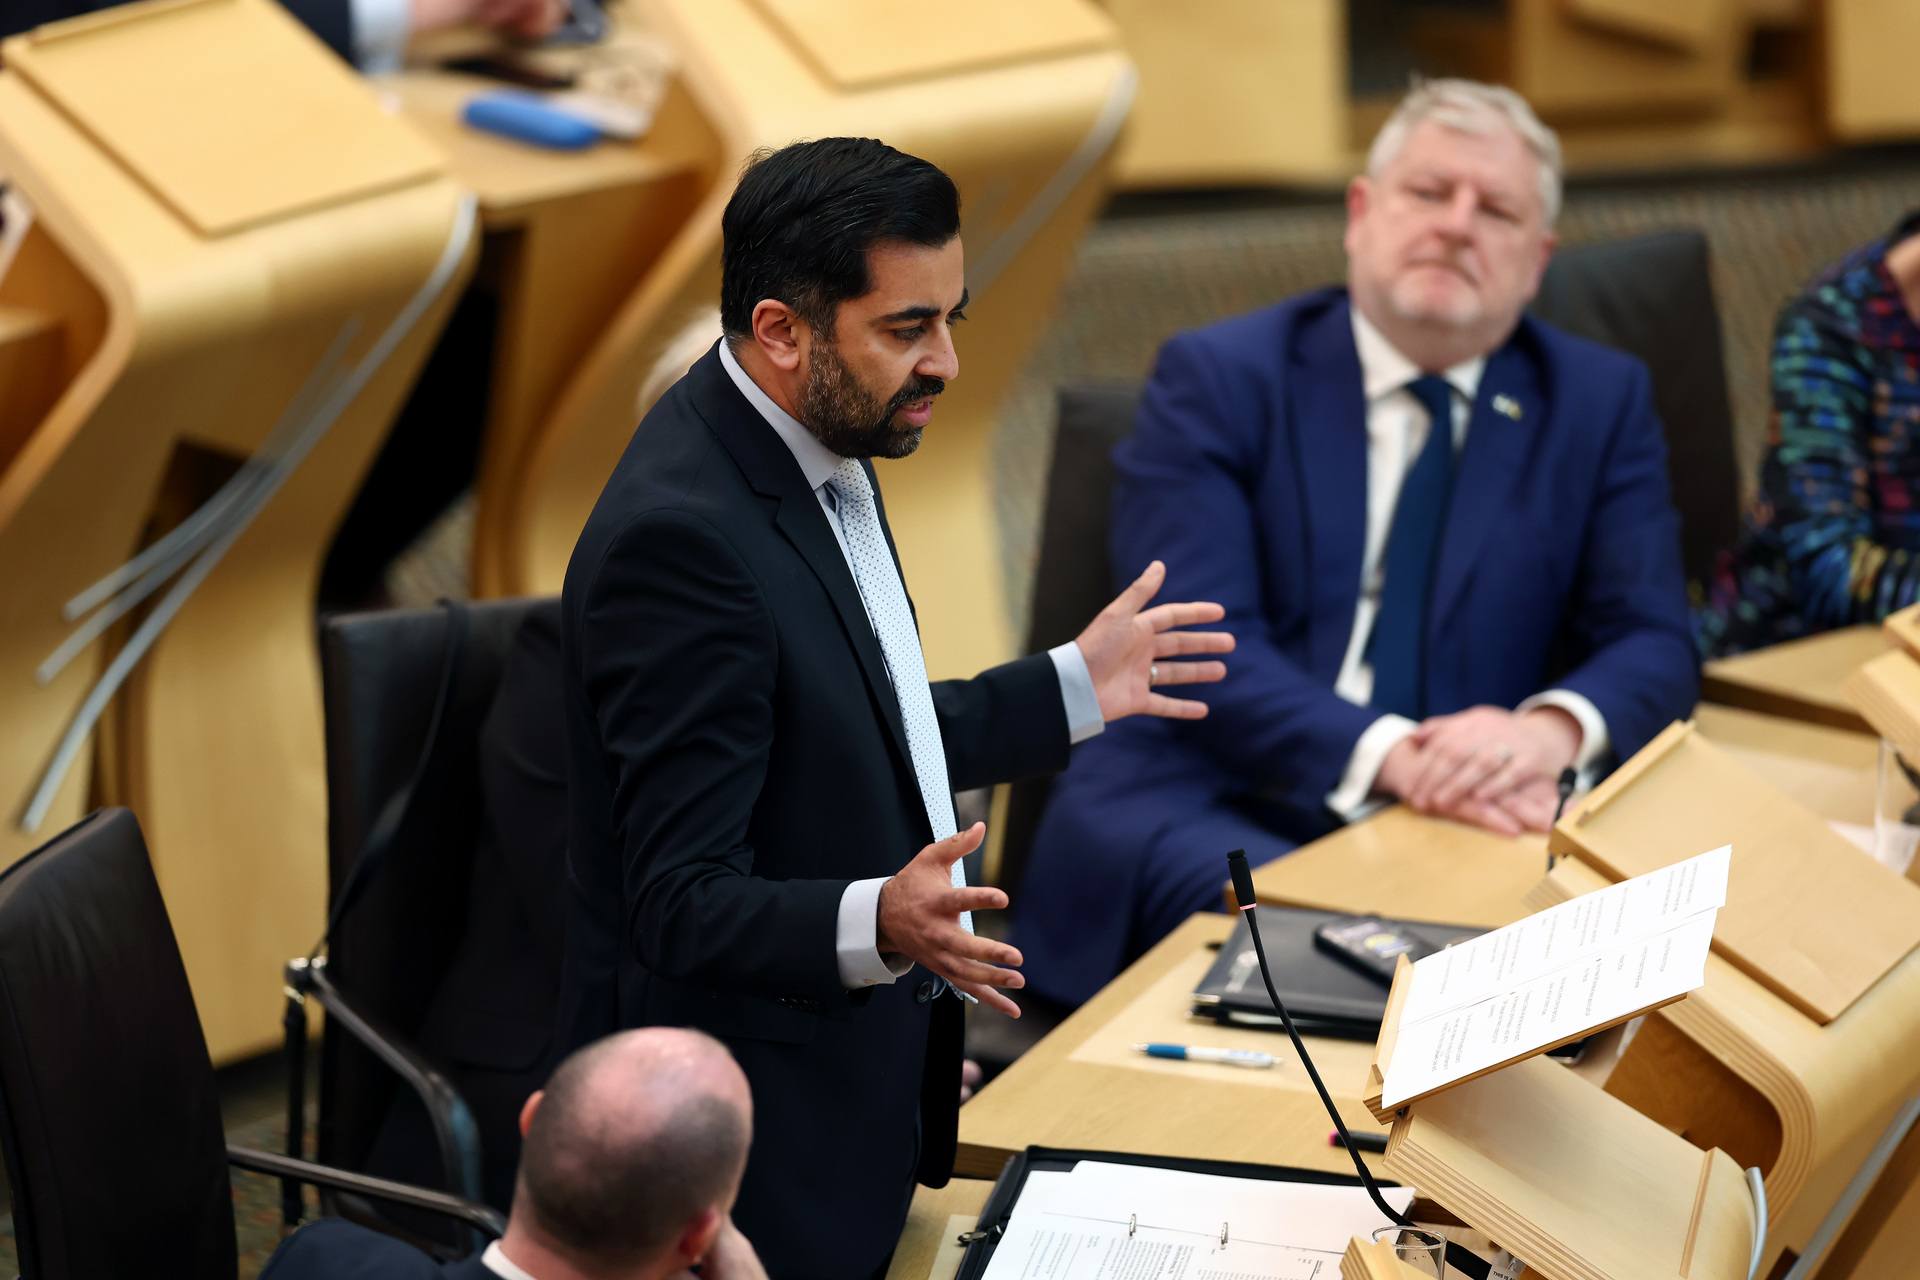 Humza Yousaf said he was proud of his government's record.